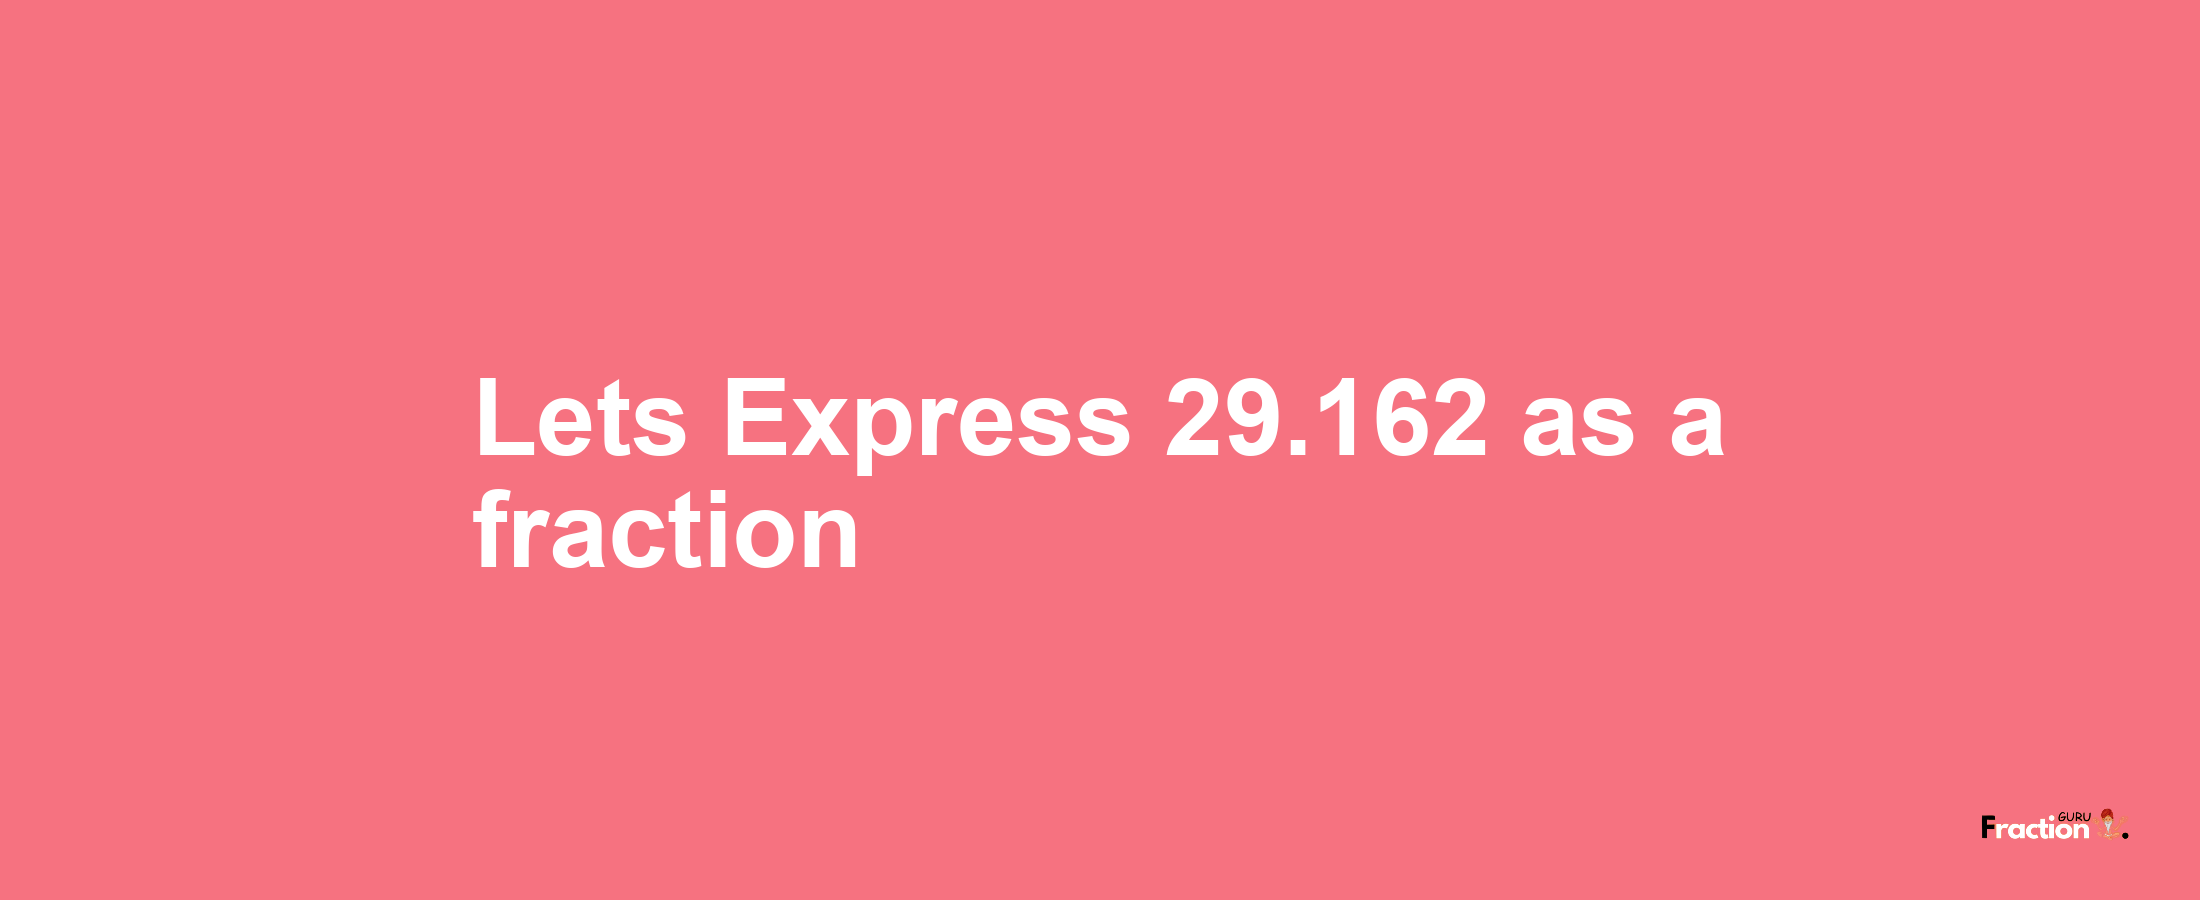 Lets Express 29.162 as afraction